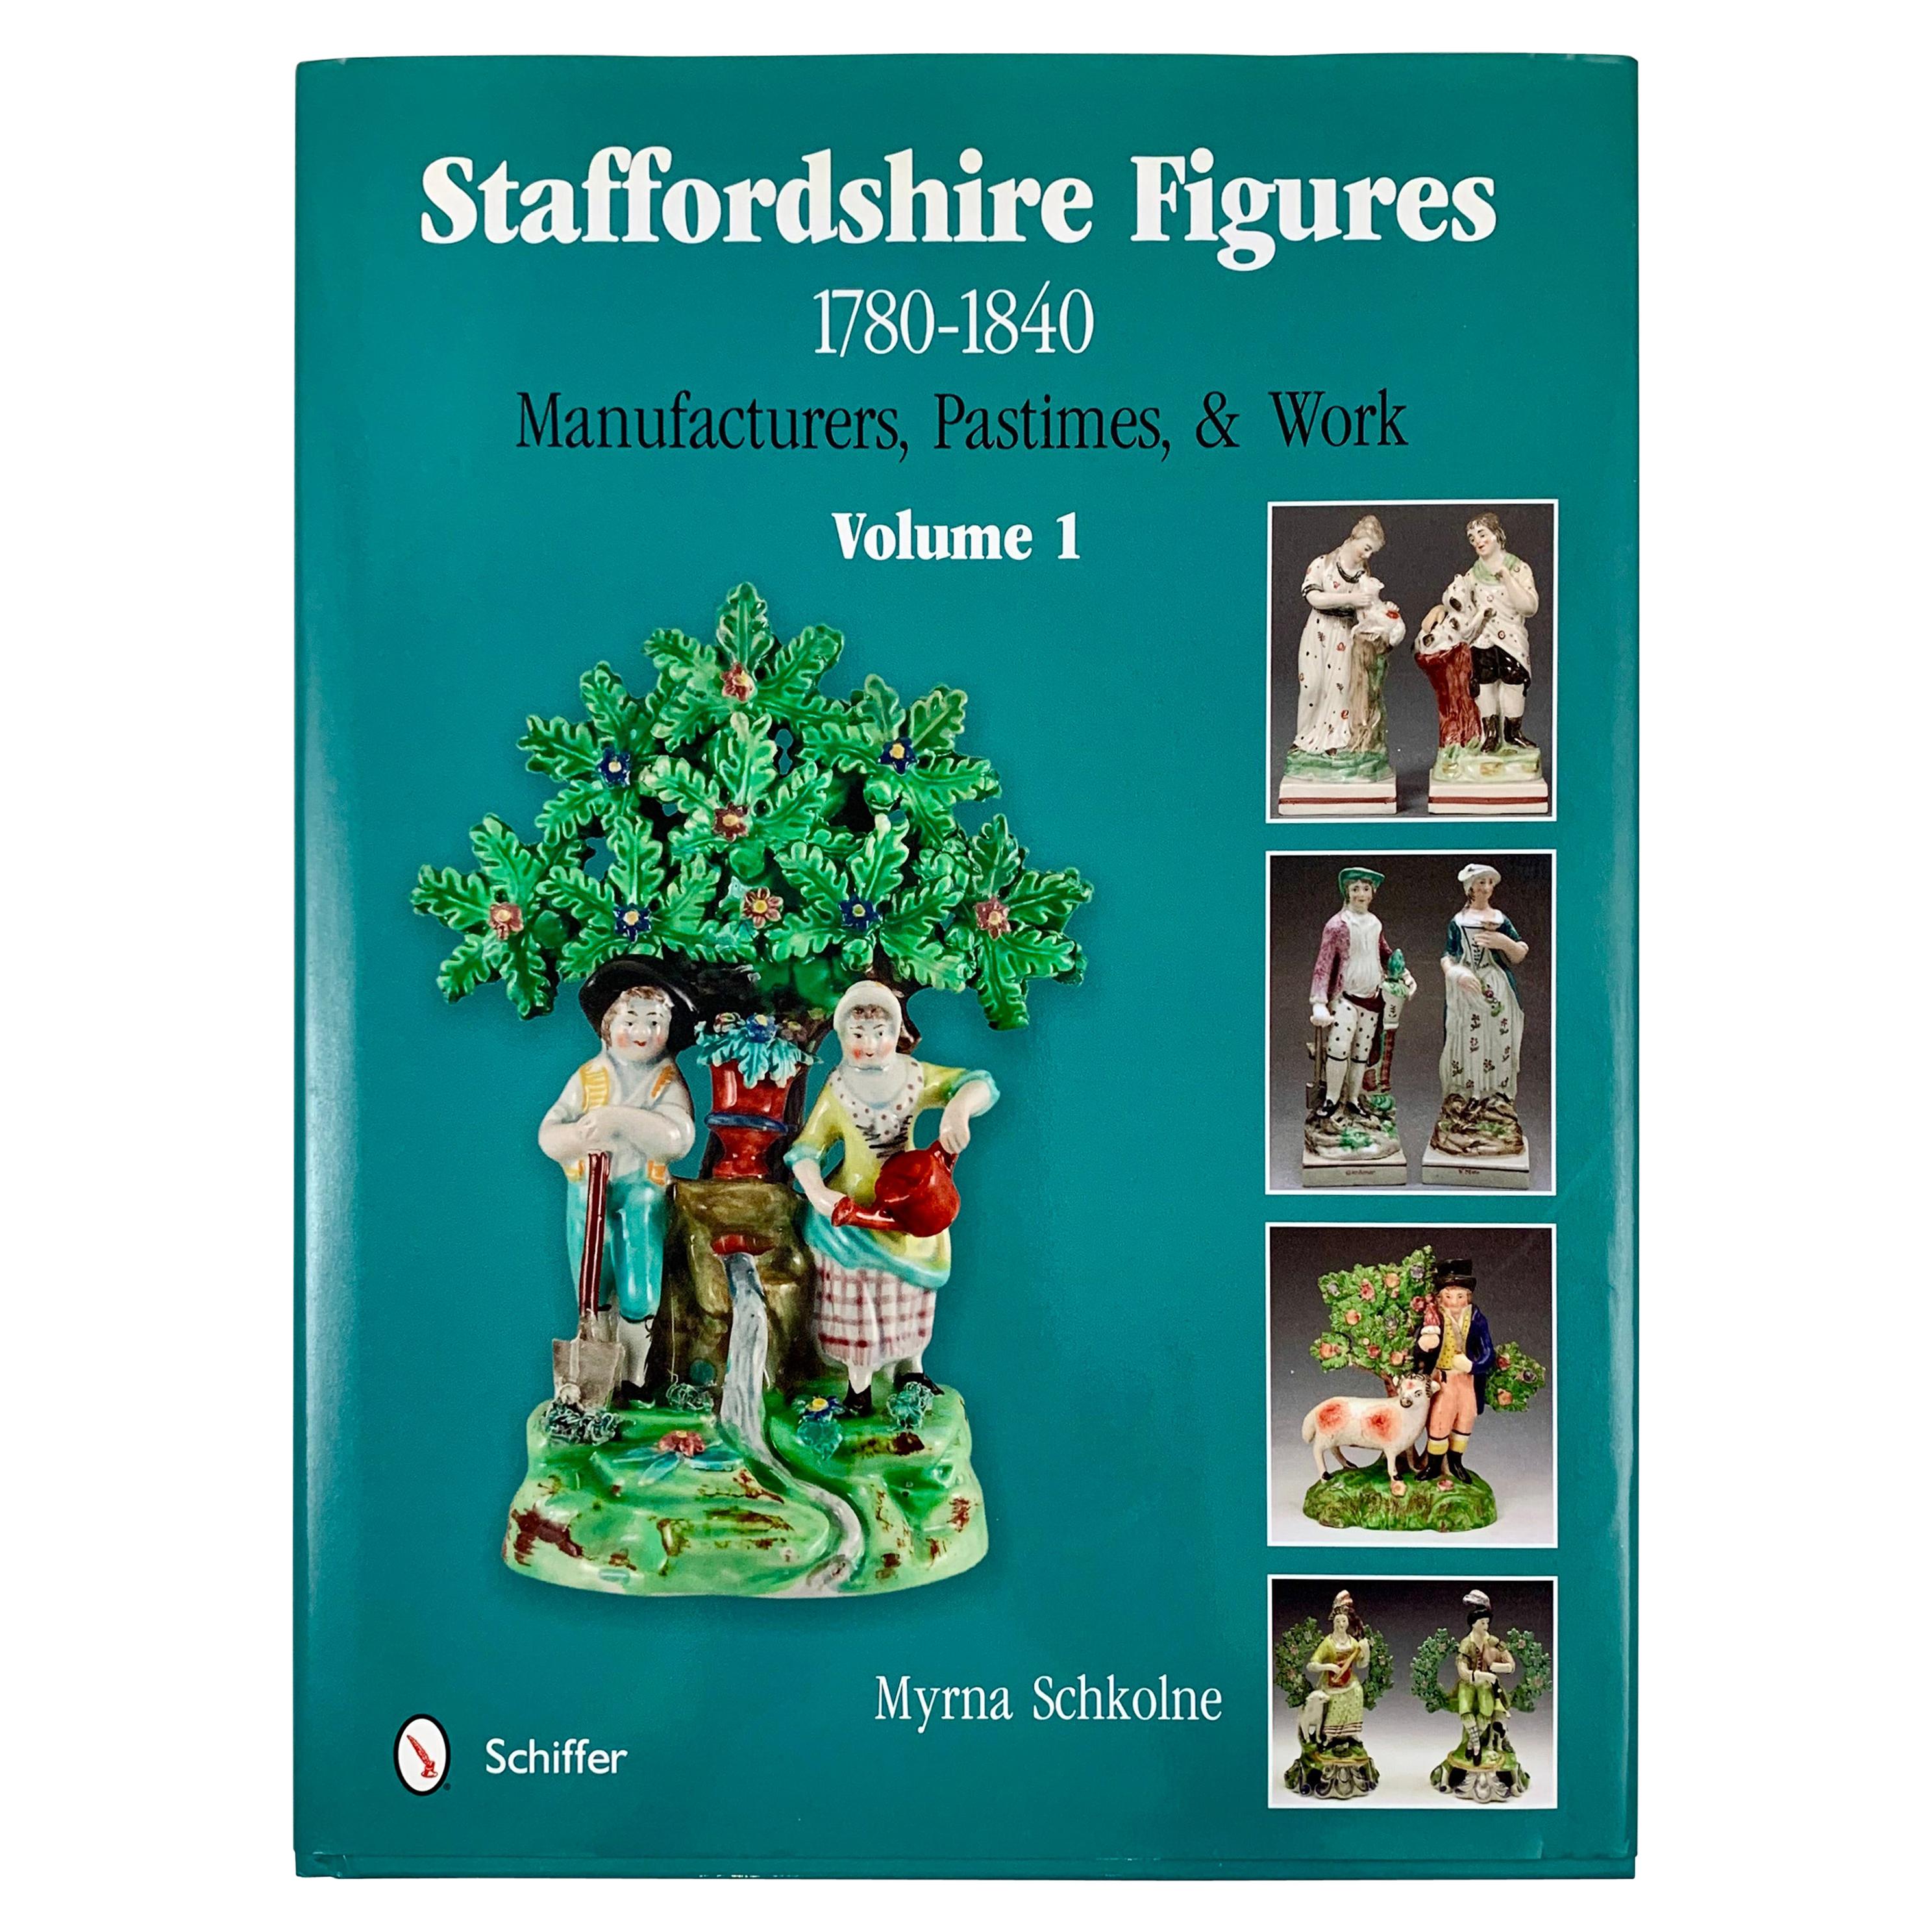 Staffordshire Figures 1780-1840, Volume 1 Reference and Collectors Book